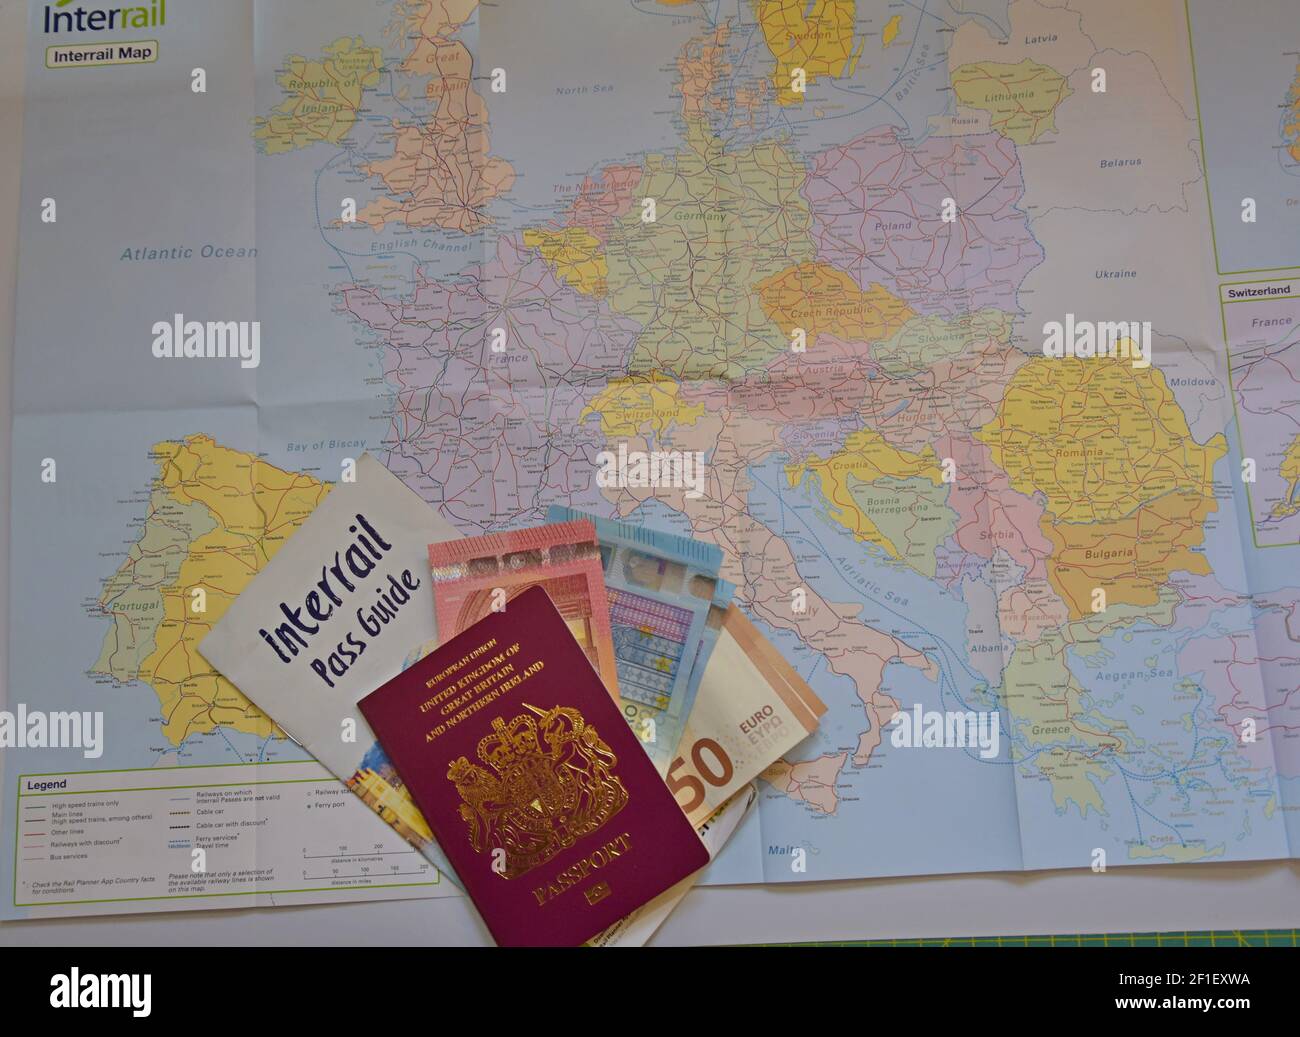 A British Passport stuffed with Euro banknotes with an Interrail guide laying on an Interrail map of Europe, ready to travel by rail across Europe Stock Photo